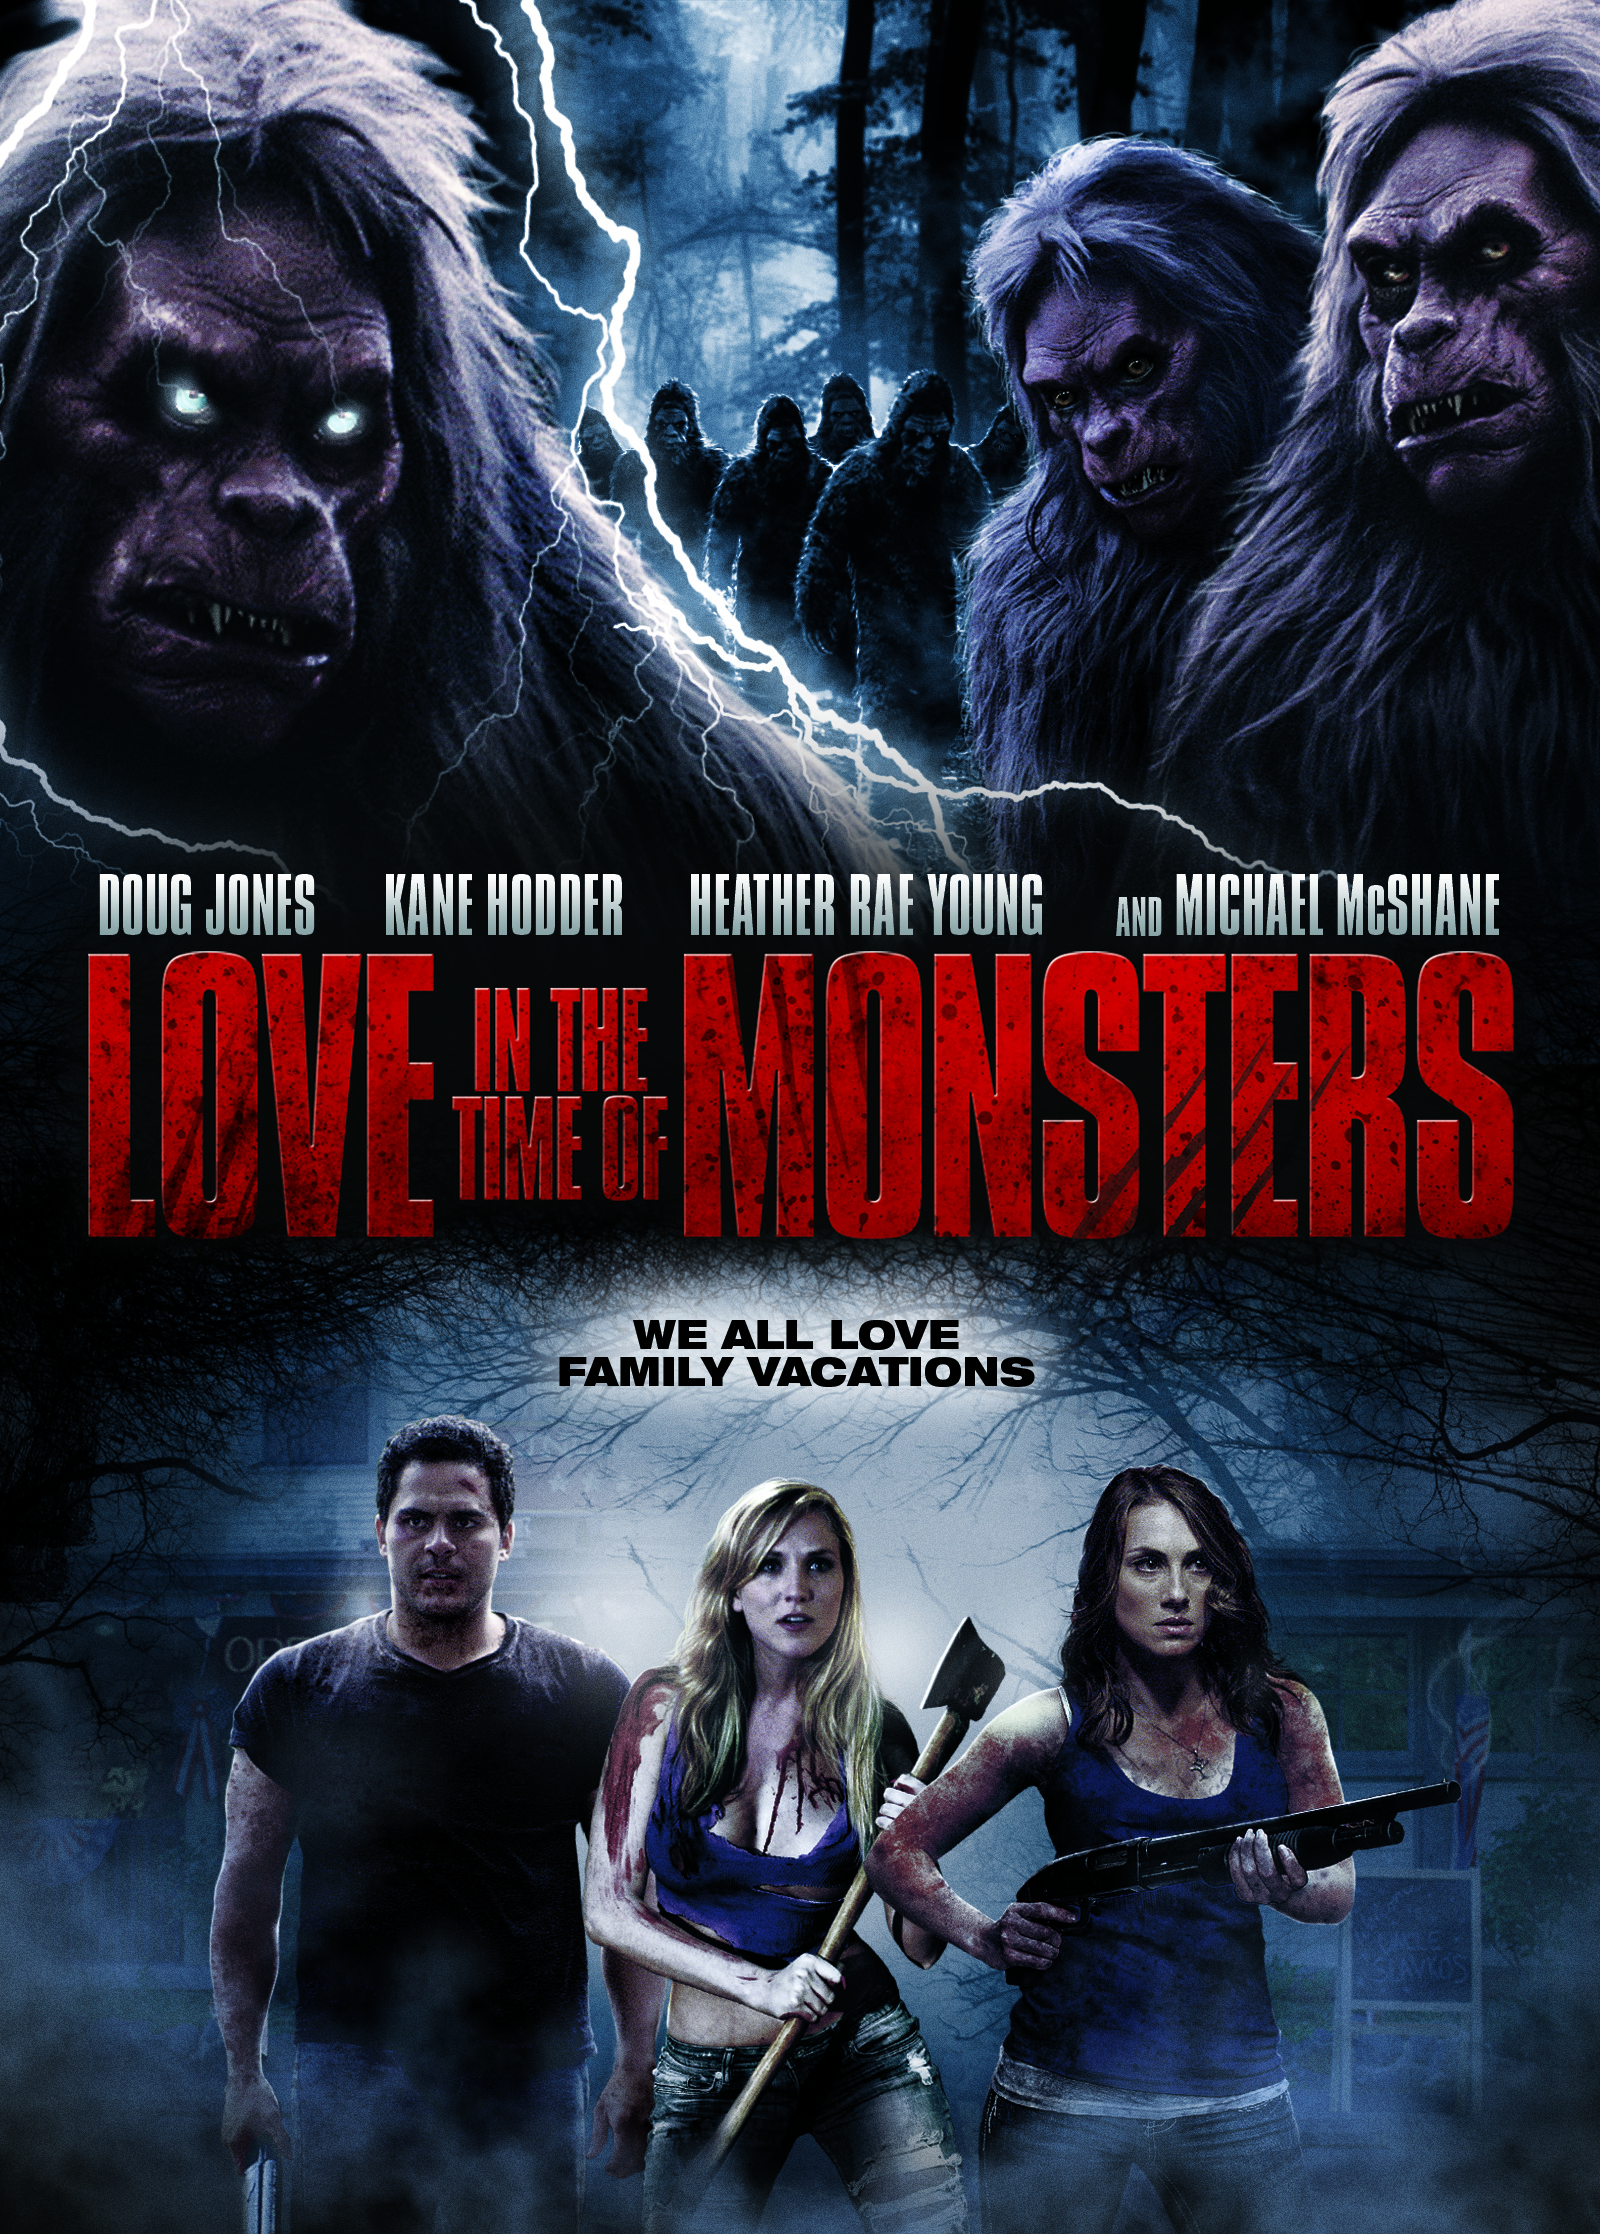 Kane Hodder, Doug Jones, Michael McShane, Shawn Weatherly and Heather Rae Young in Love in the Time of Monsters (2014)